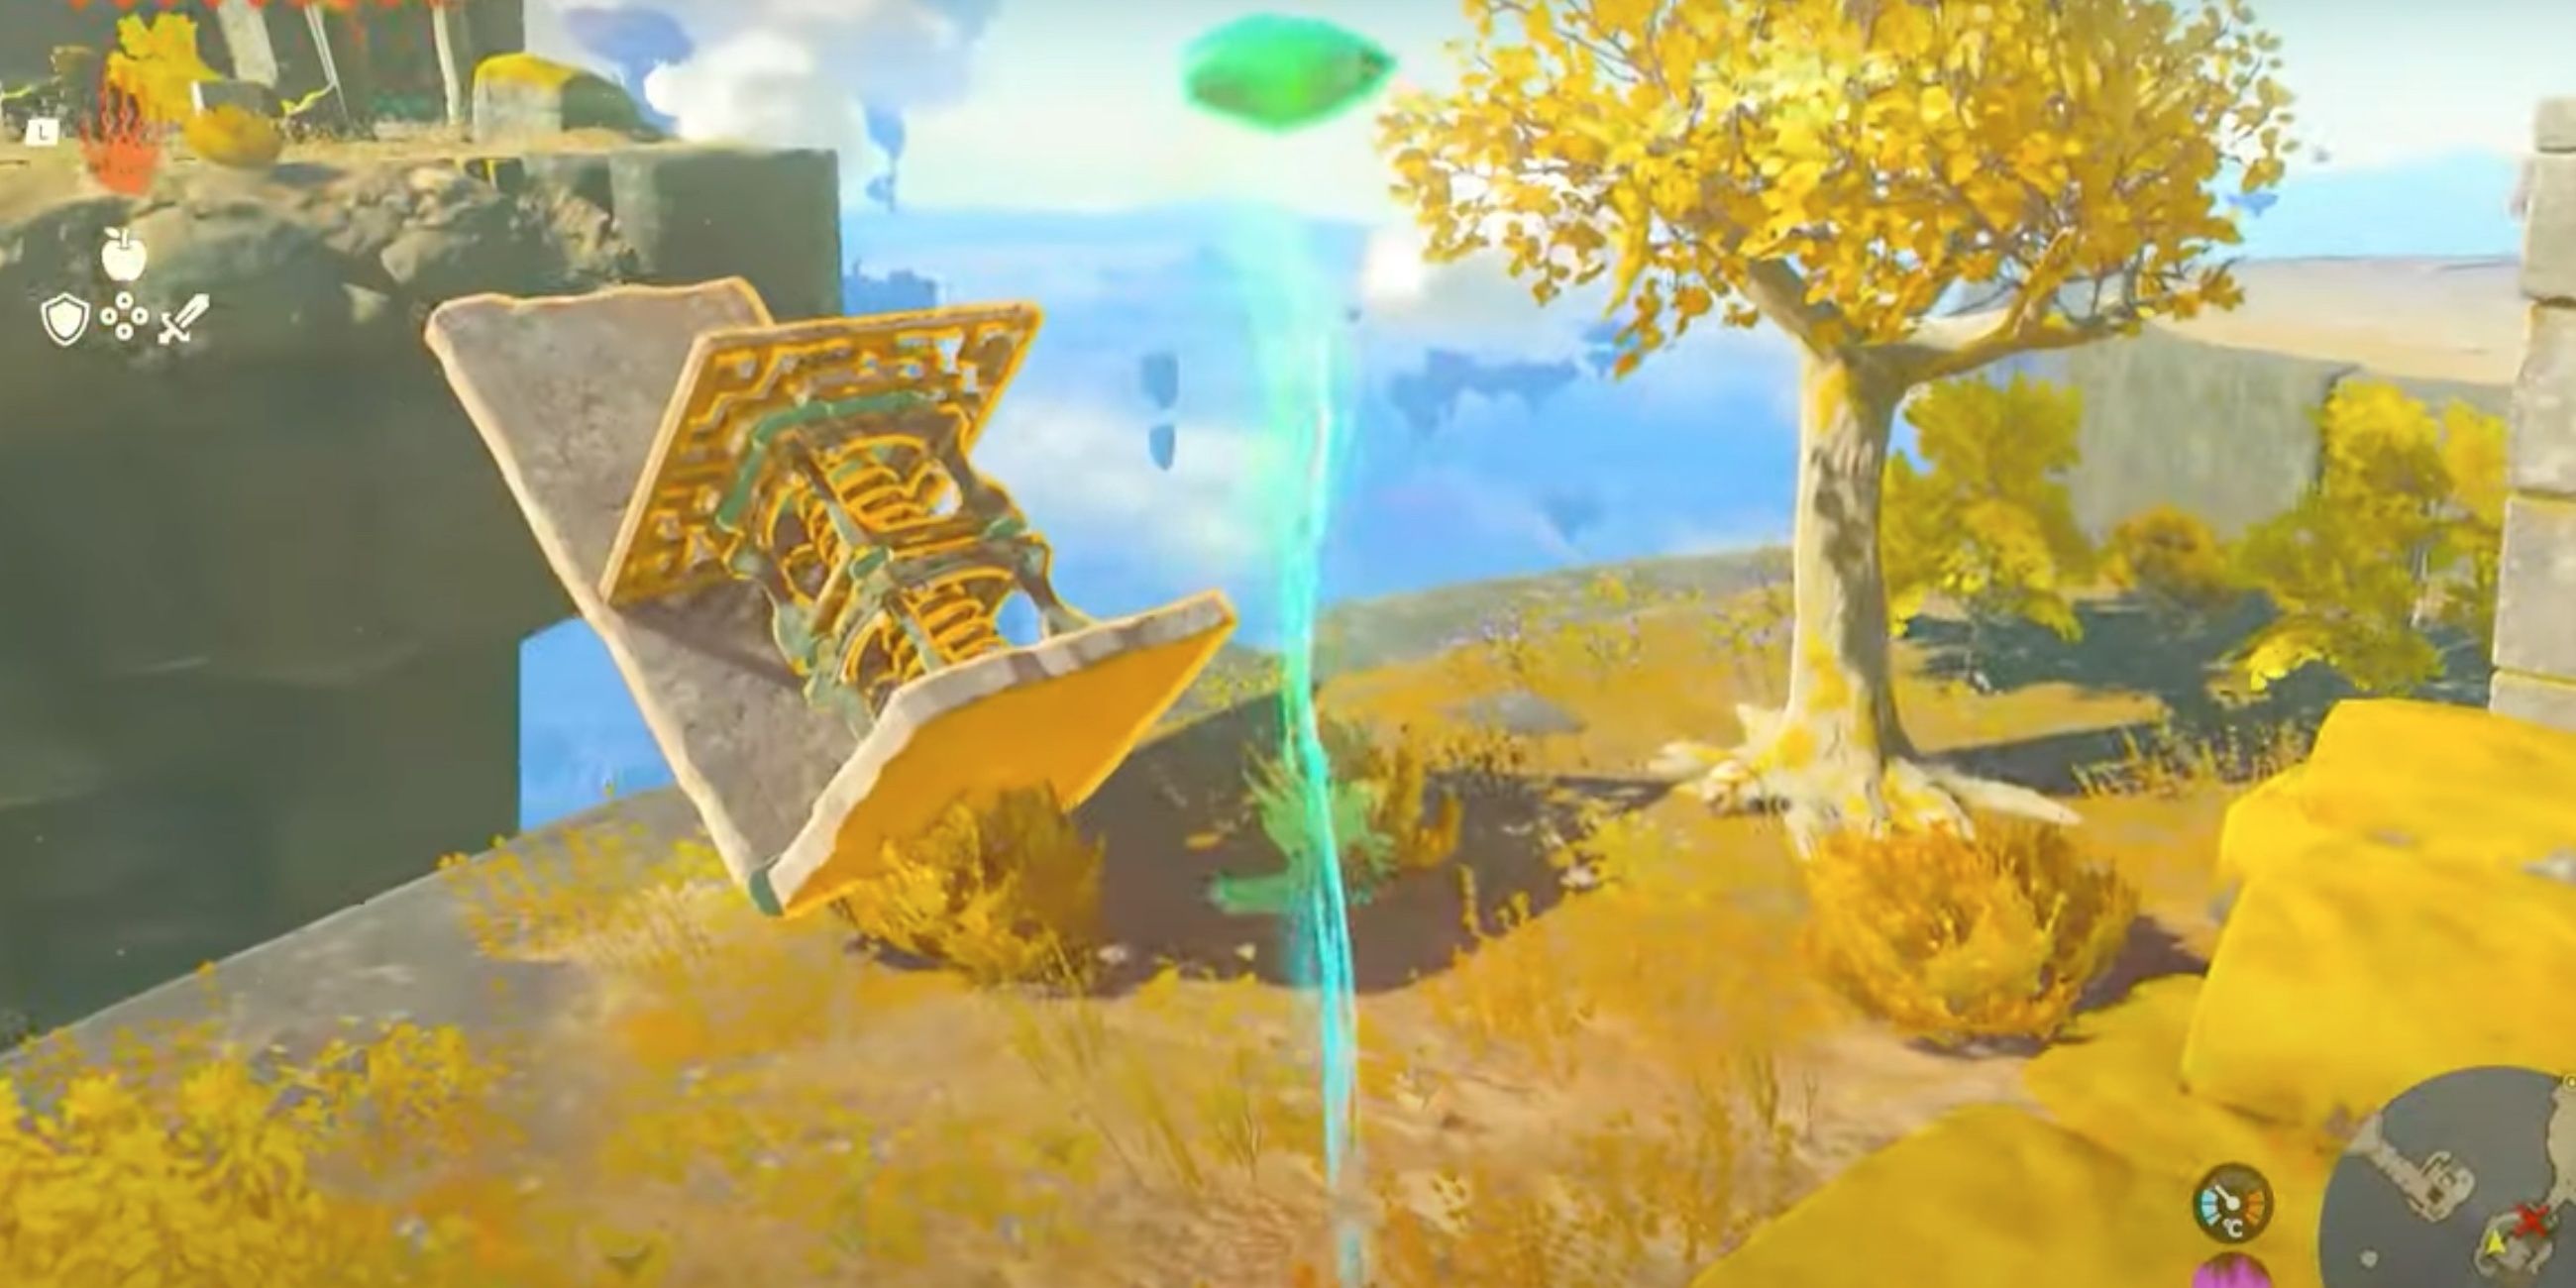 Link prepares to shoot crystals using a launcher in The Legend of Zelda: Kingdom of Tears.